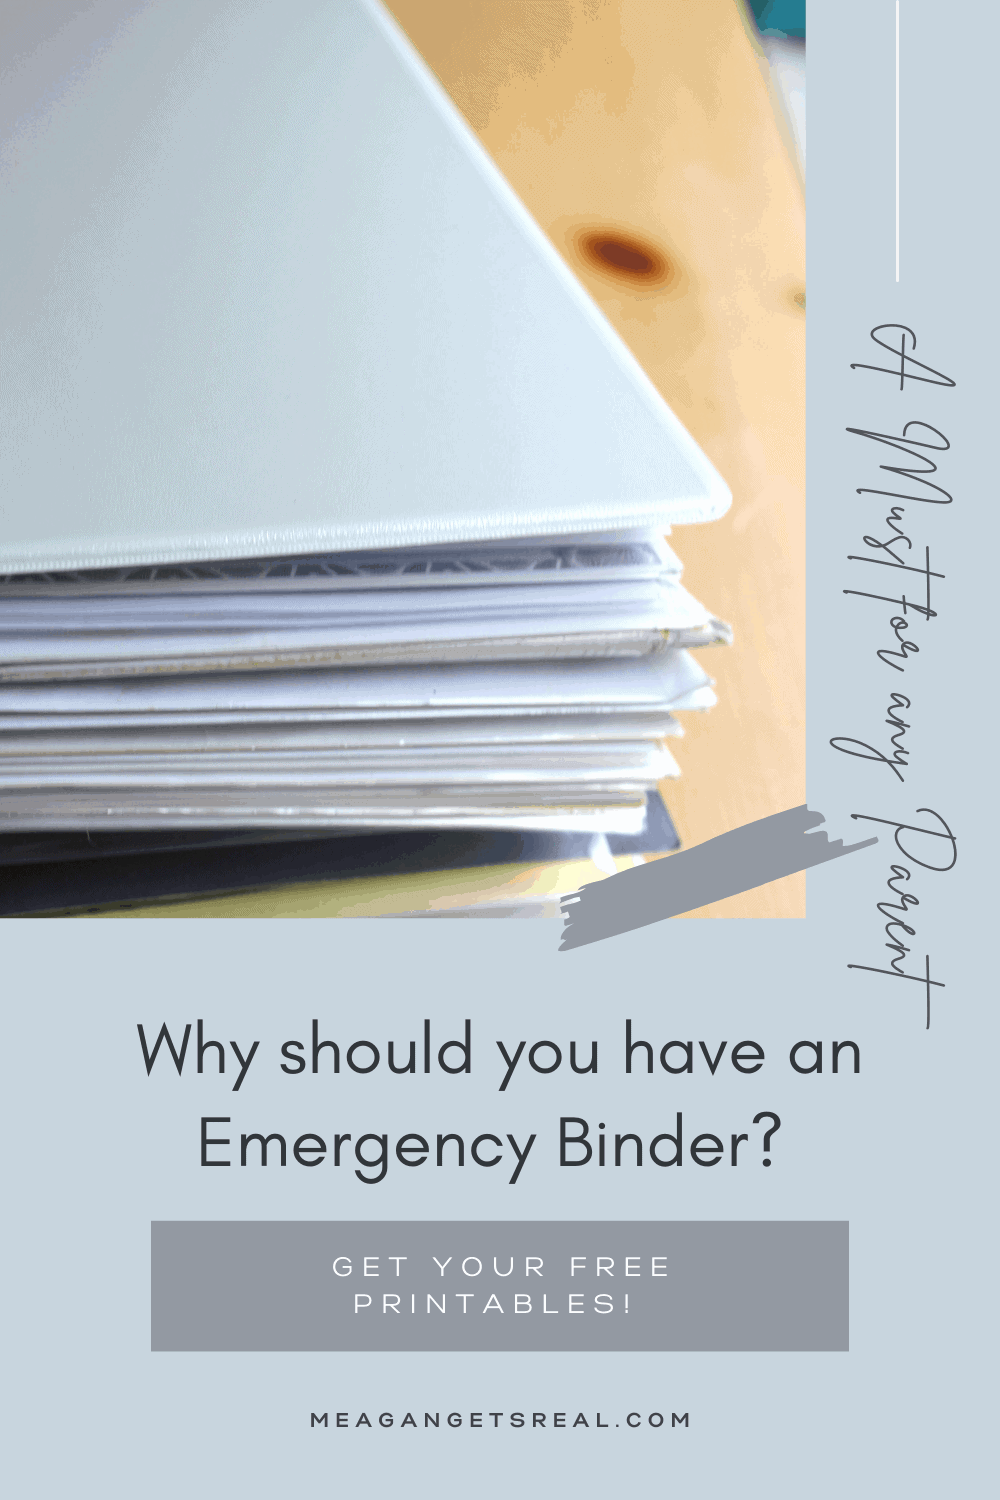 An emergency binder filled with your vital information can be so important! Plan for an emergency with this binder with all important information. Includes Free Printables! #EmergencyBinder #Parenting #EstatePlanning #PlanAhead #Organization